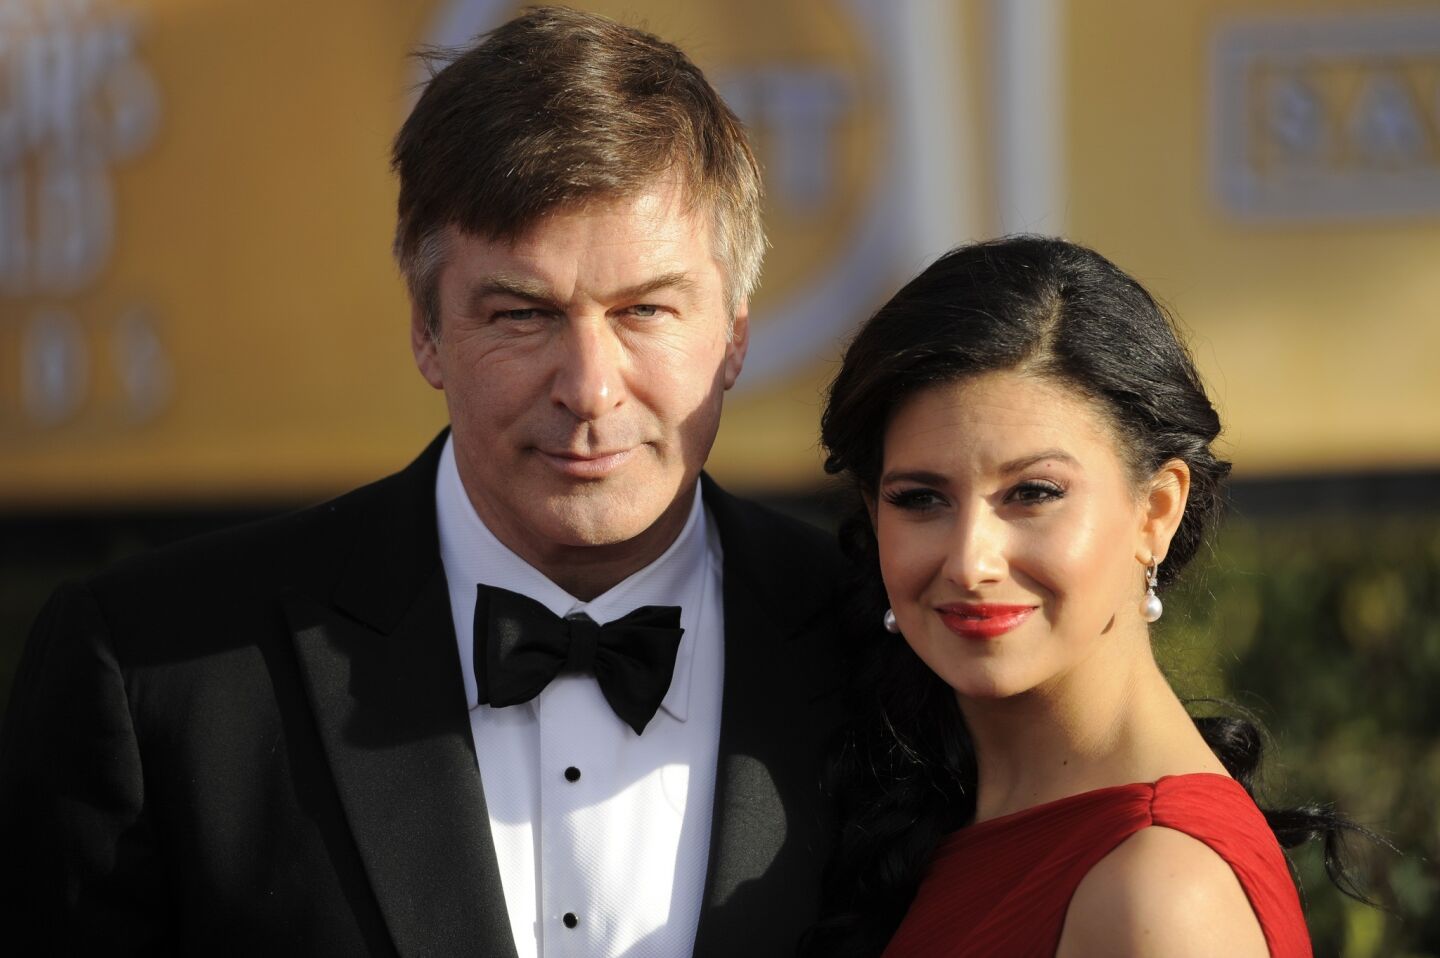 Alec Baldwin and his yoga-instructor sweetheart Hilaria Thomas are parents again. The welcomed baby boy, Rafael Thomas Baldwin, joins older sister Carmen Gabriela. Alec is also father to daughter Ireland with ex-wife Kim Basinger.